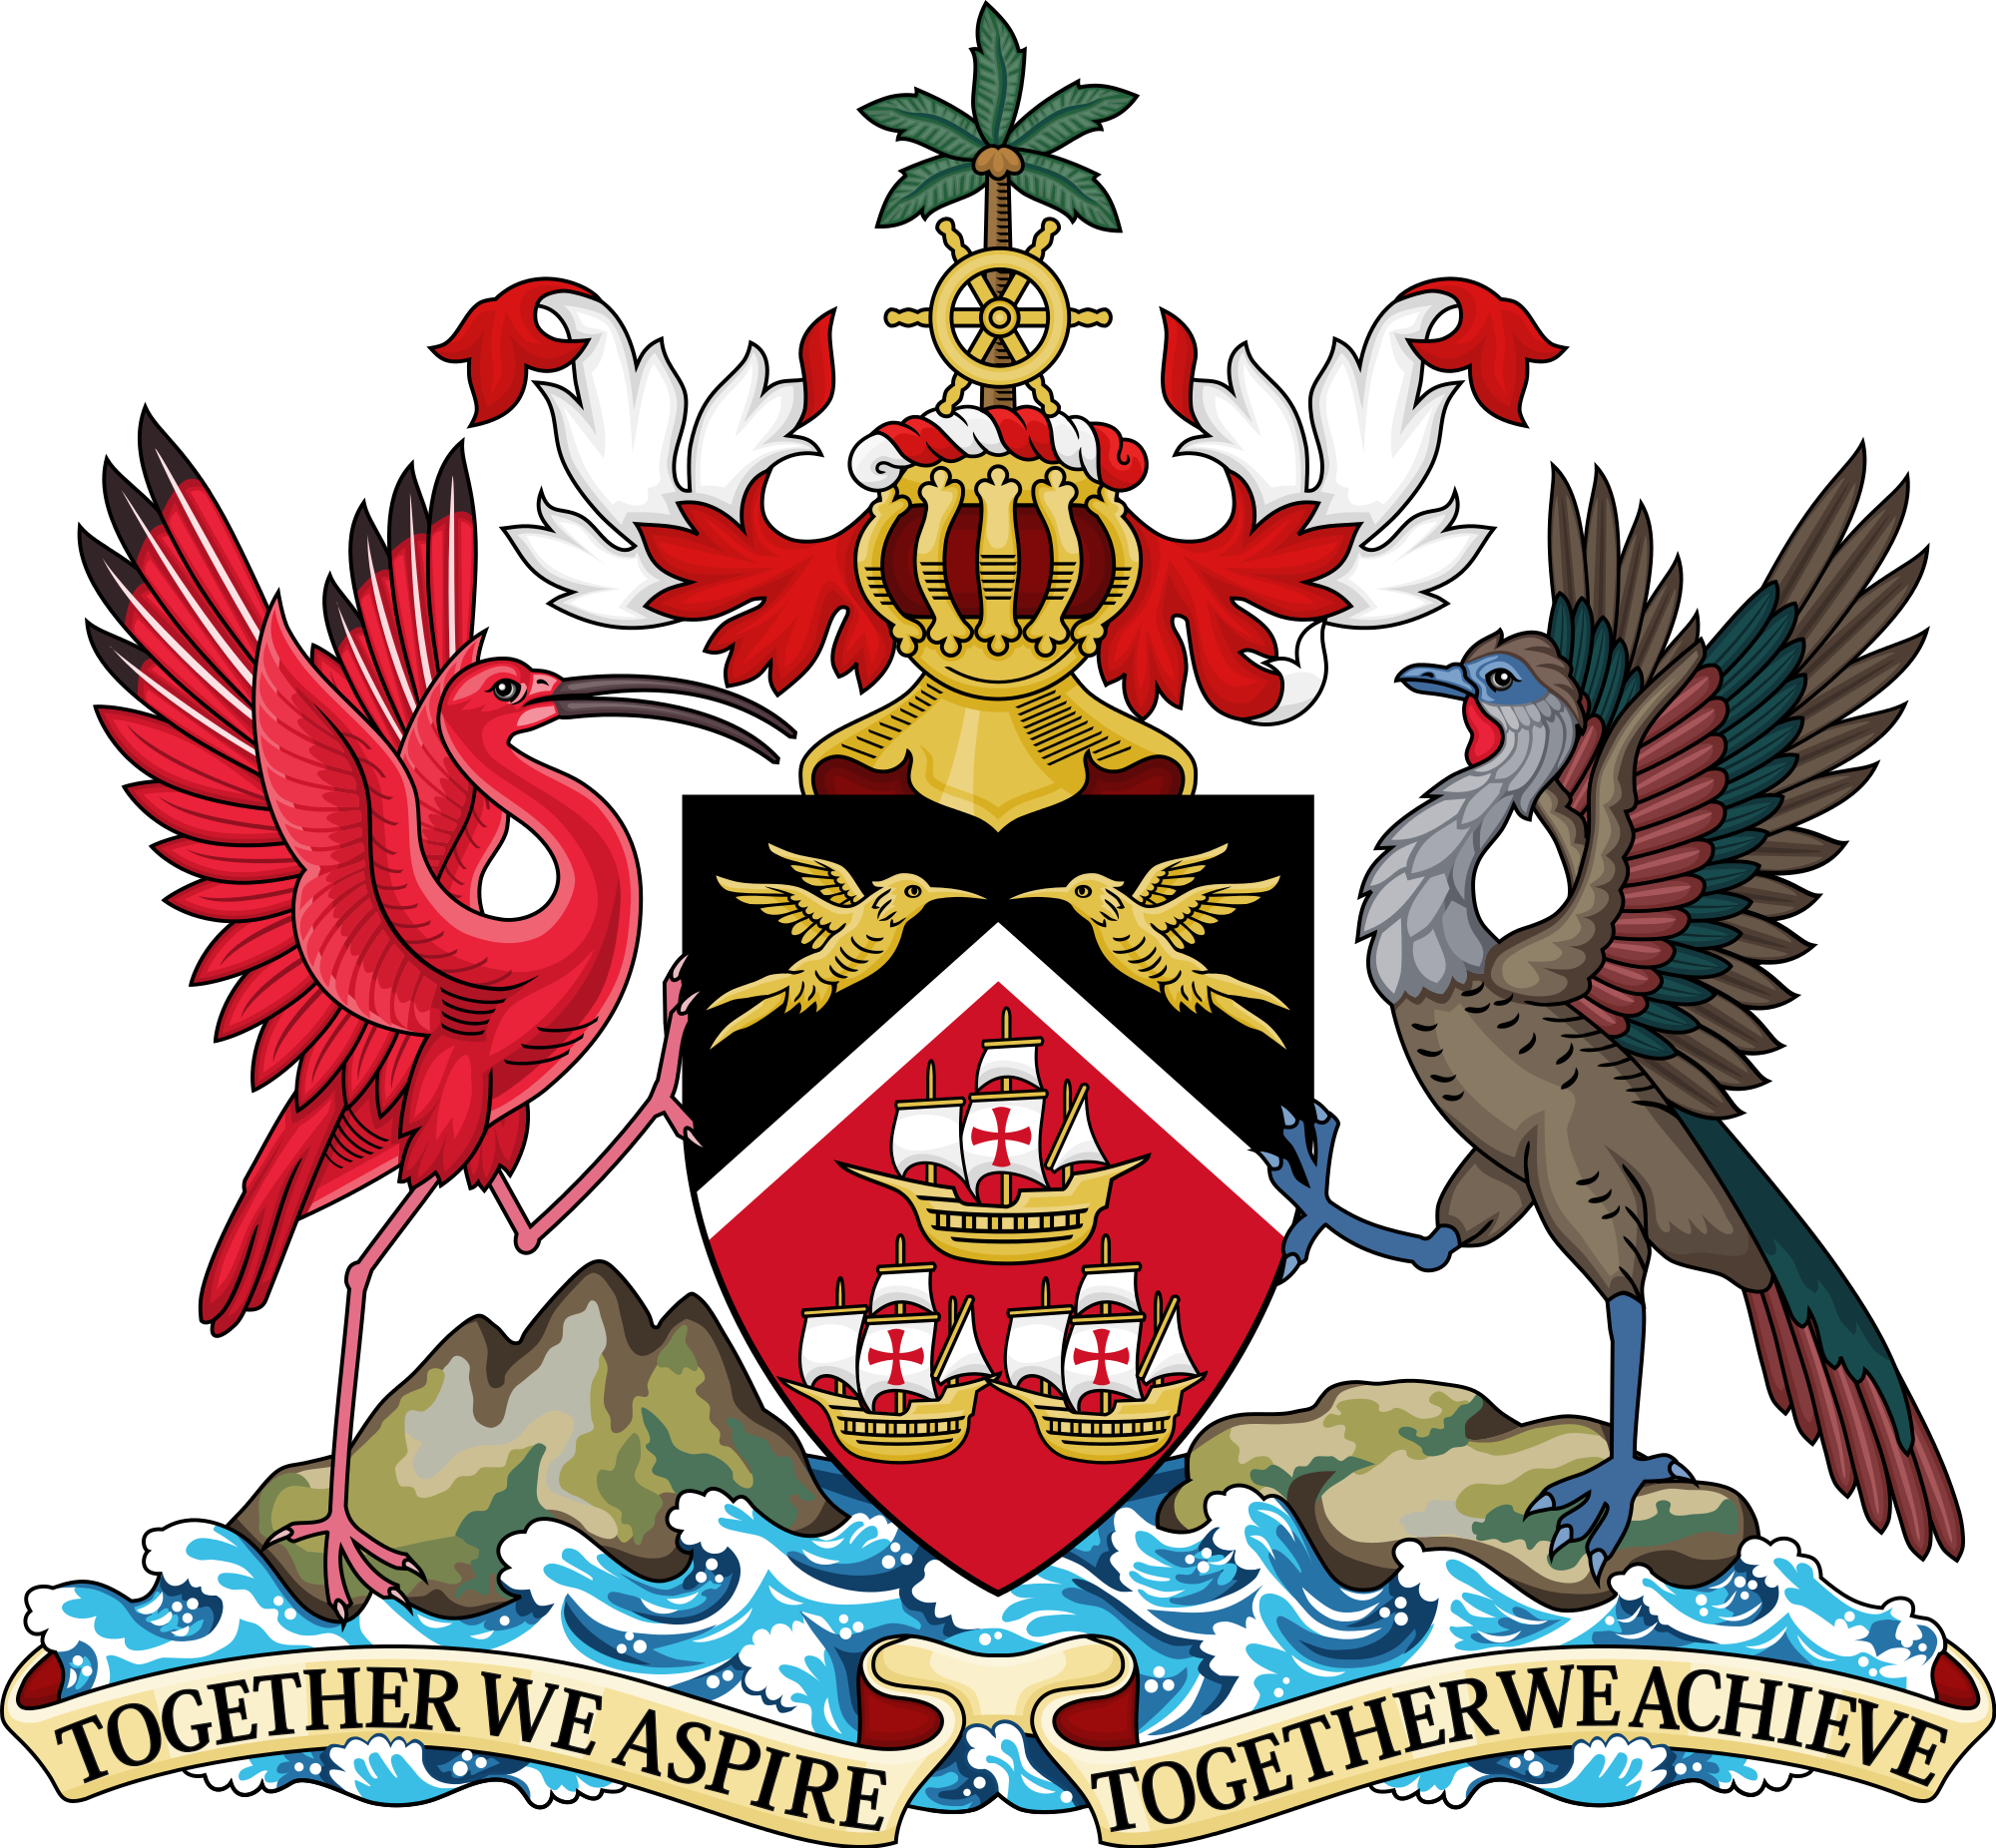 File:Coat of arms of Trinidad and Tobago.svg - Wikimedia Commons